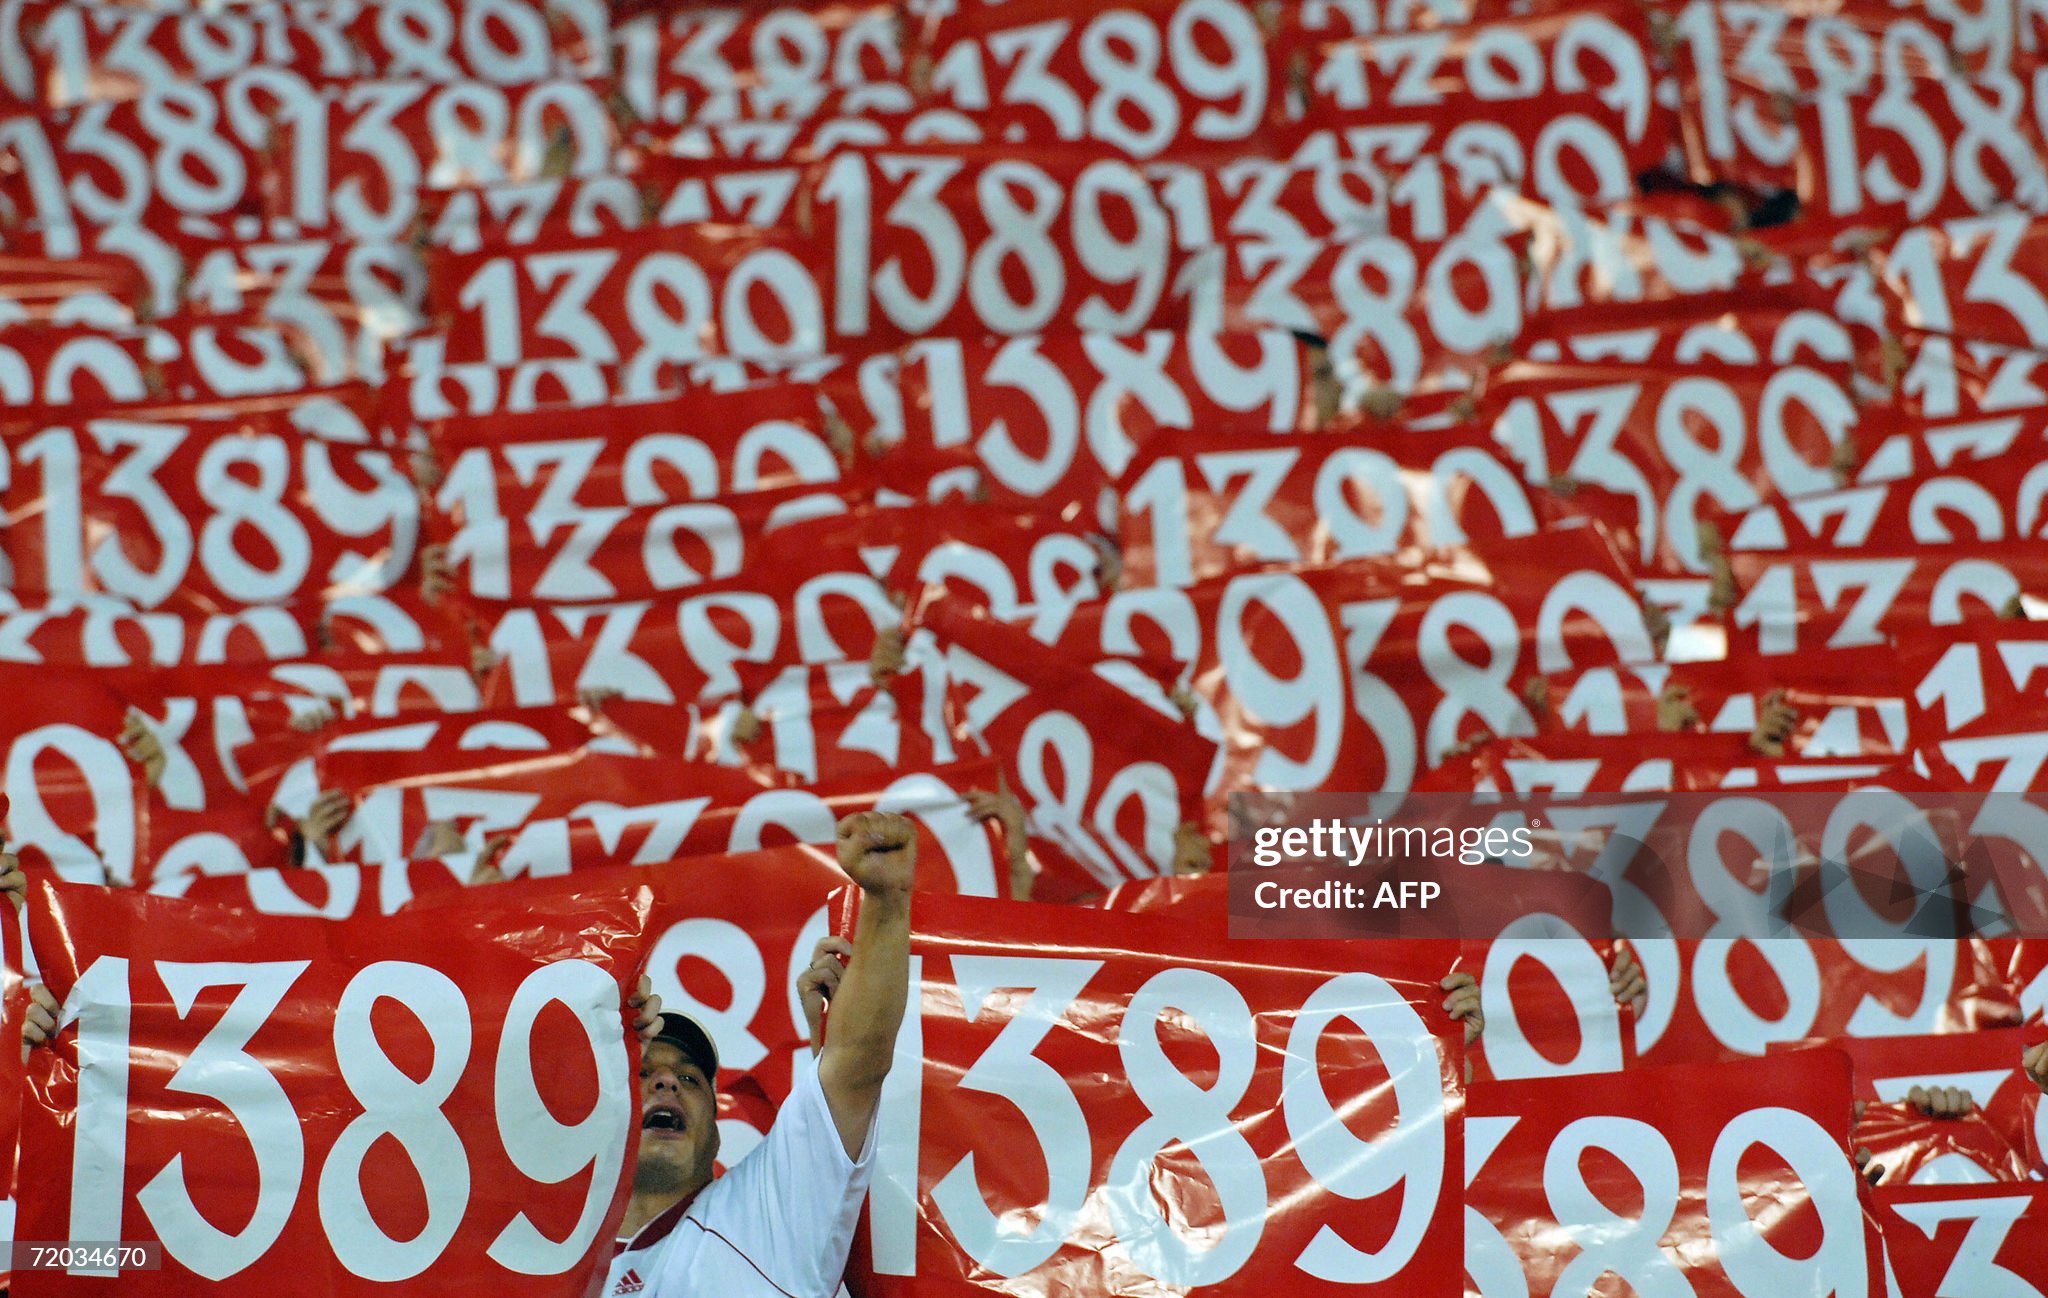 red-star-belgrade-fan-cheers-among-other-supporters-holding-banners-with-the-year-1389-when-the.jpg